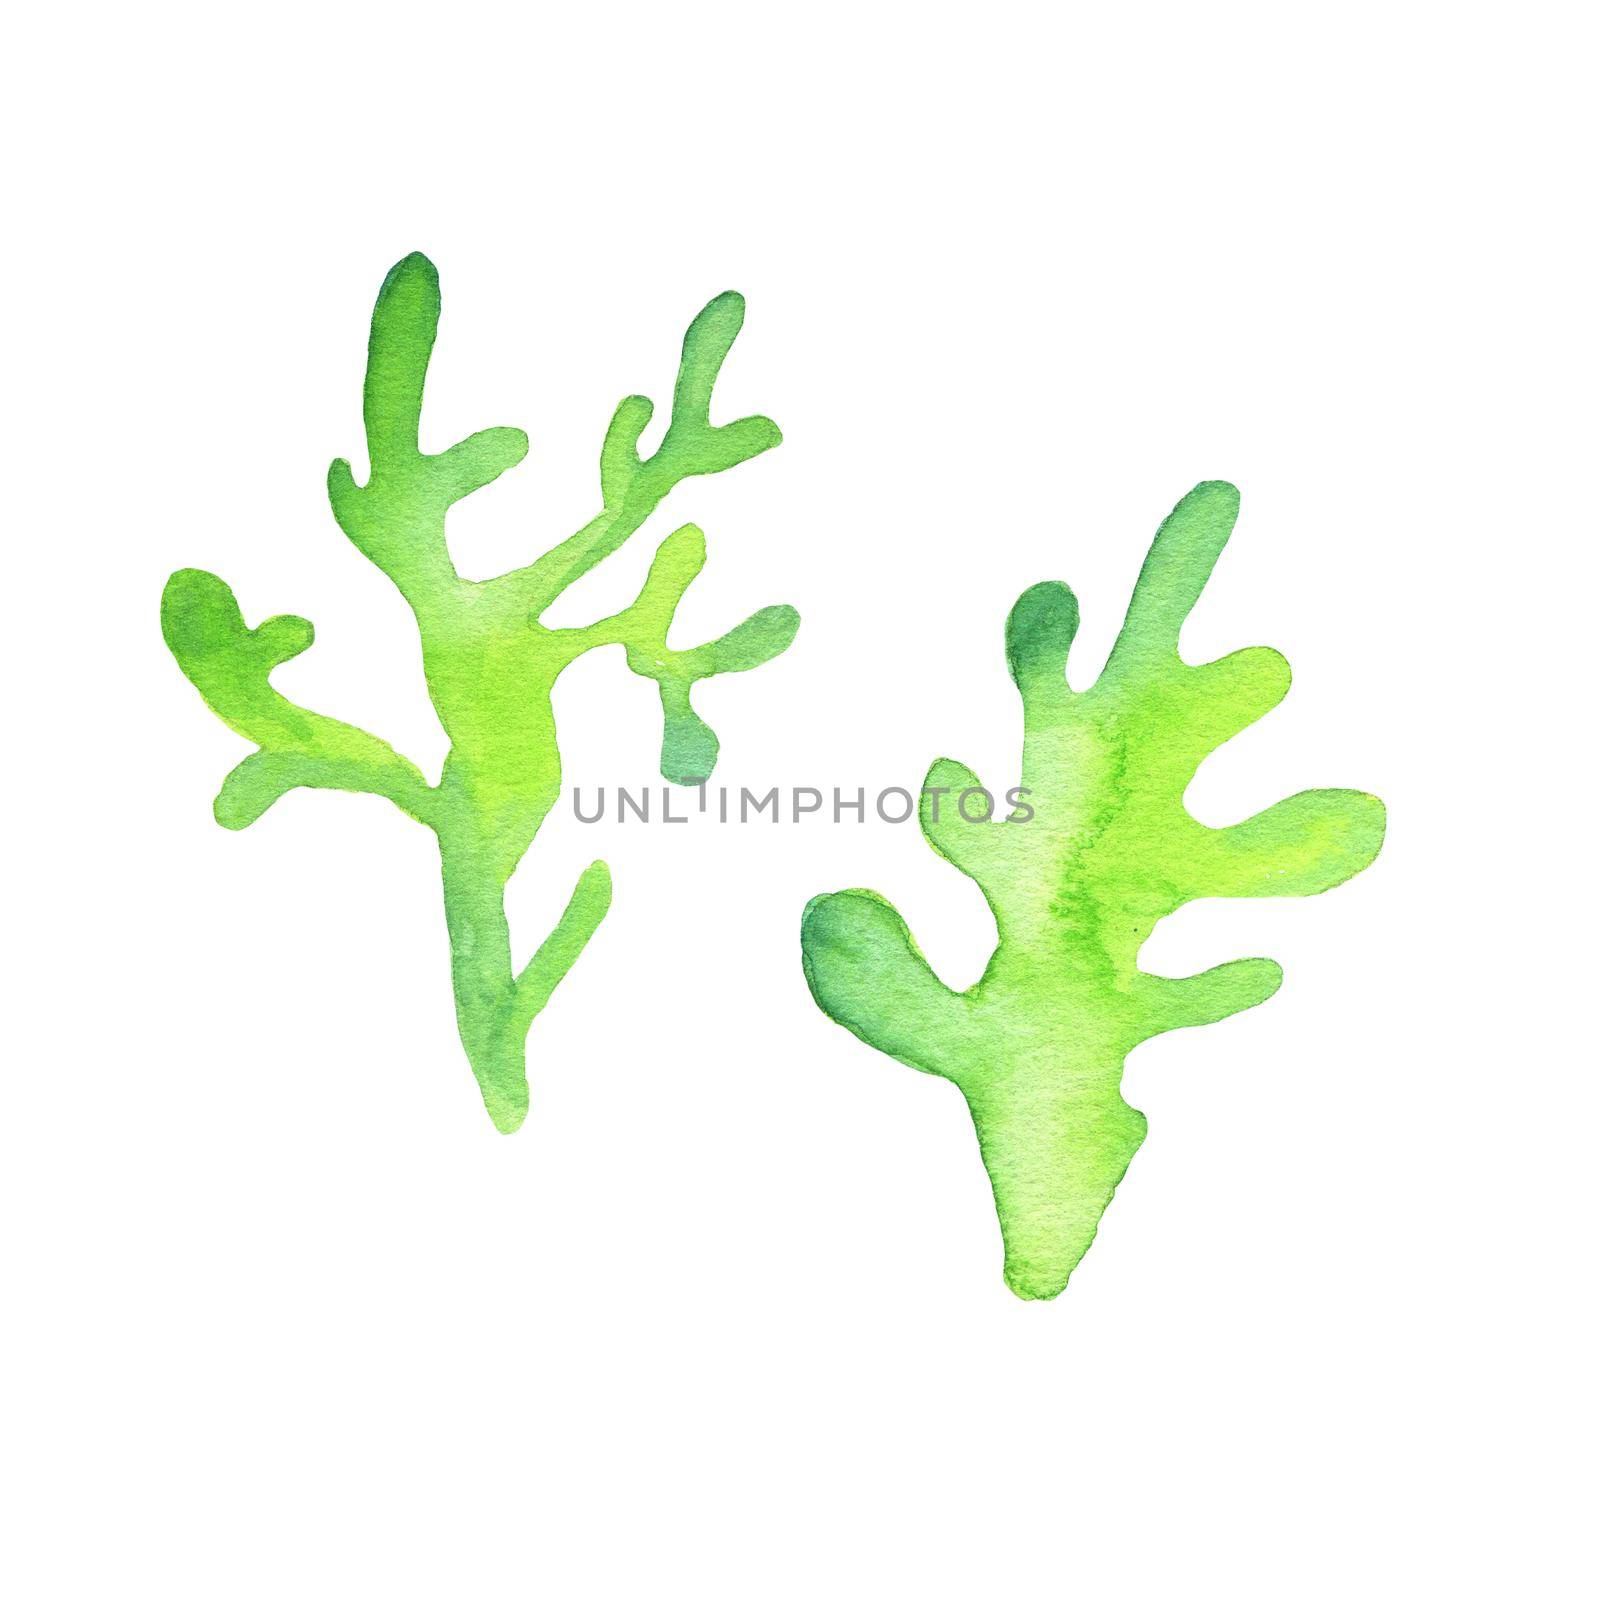 Seaweed silhouette. Set of simple underwater plants. Watercolor illustrations isolated on white background.